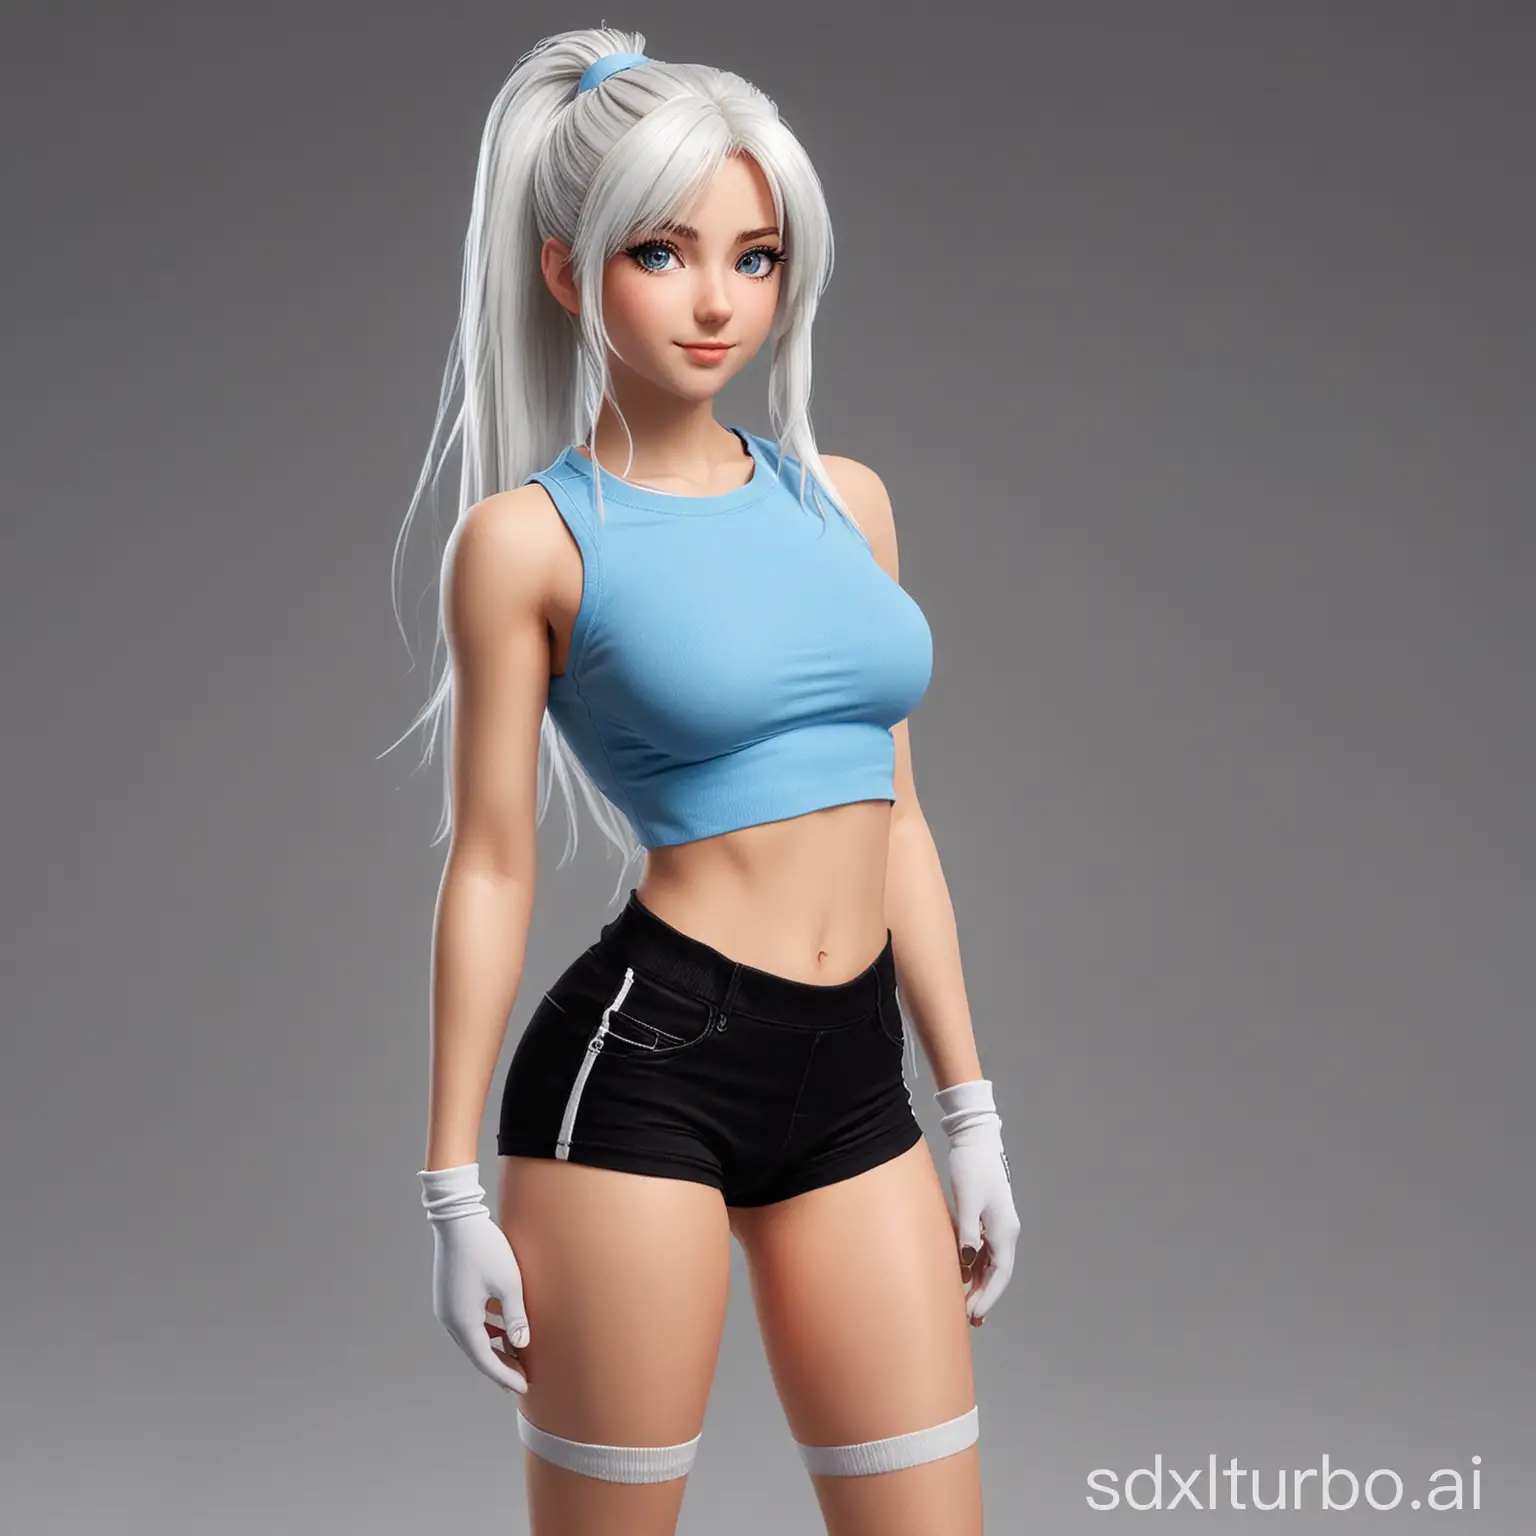 Create an anime girl with europeoid facial features, fit body. Attractive breasts and attractive butt. Full height. Attractive face. Happy face. Long white hair with fringe. Hair tied in a ponytail with red rubber band. Light blue eyes. Thin eyebrows. Sexy fitting blue top with black trim. Cropped top. Fitting sexy tight sporty black shorts. Shorts with light blue fabric inserts. White sneakers. White socks.